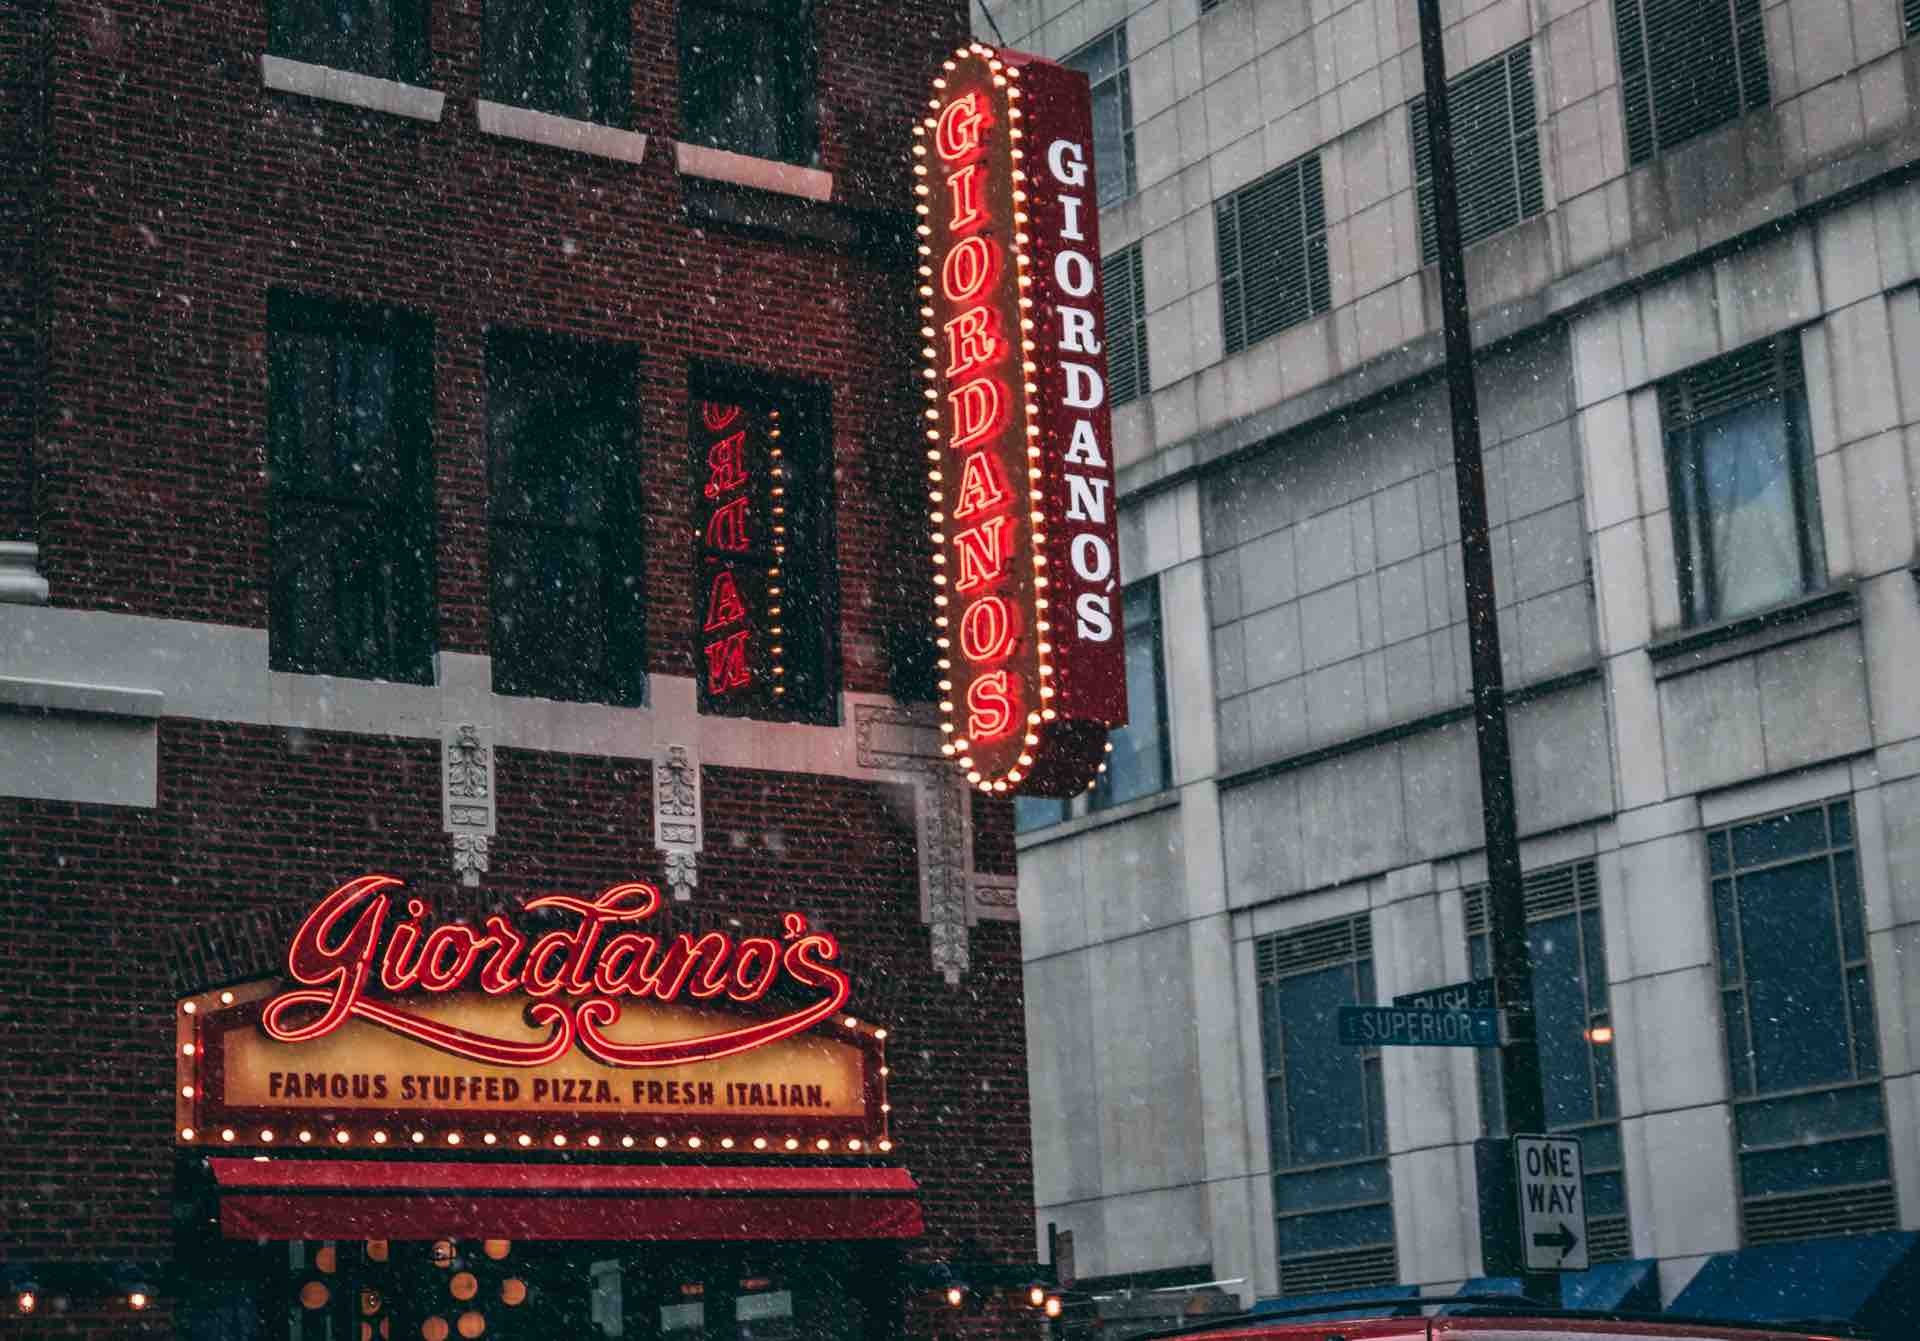 Photo: Matt Antolioli(Apologies in advance to Max if he thinks Giordano's sucks; I just like the photo and I think I actually ate there years ago.)